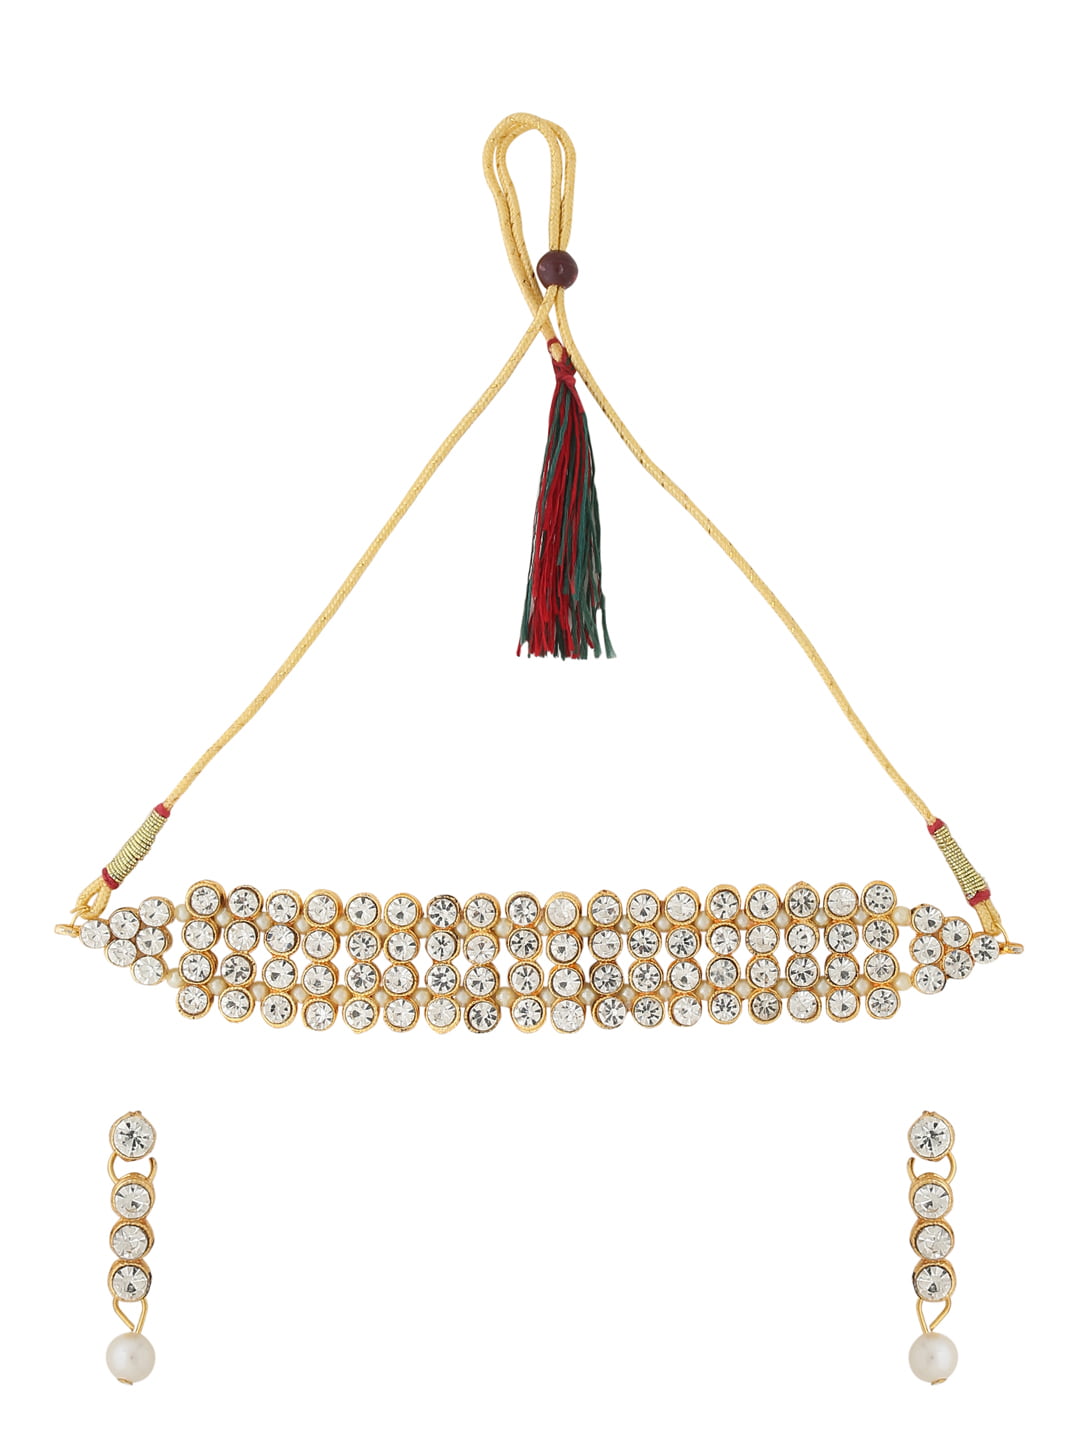 classic-gold-plated-choker-necklace-set-with-pearls-viraasi